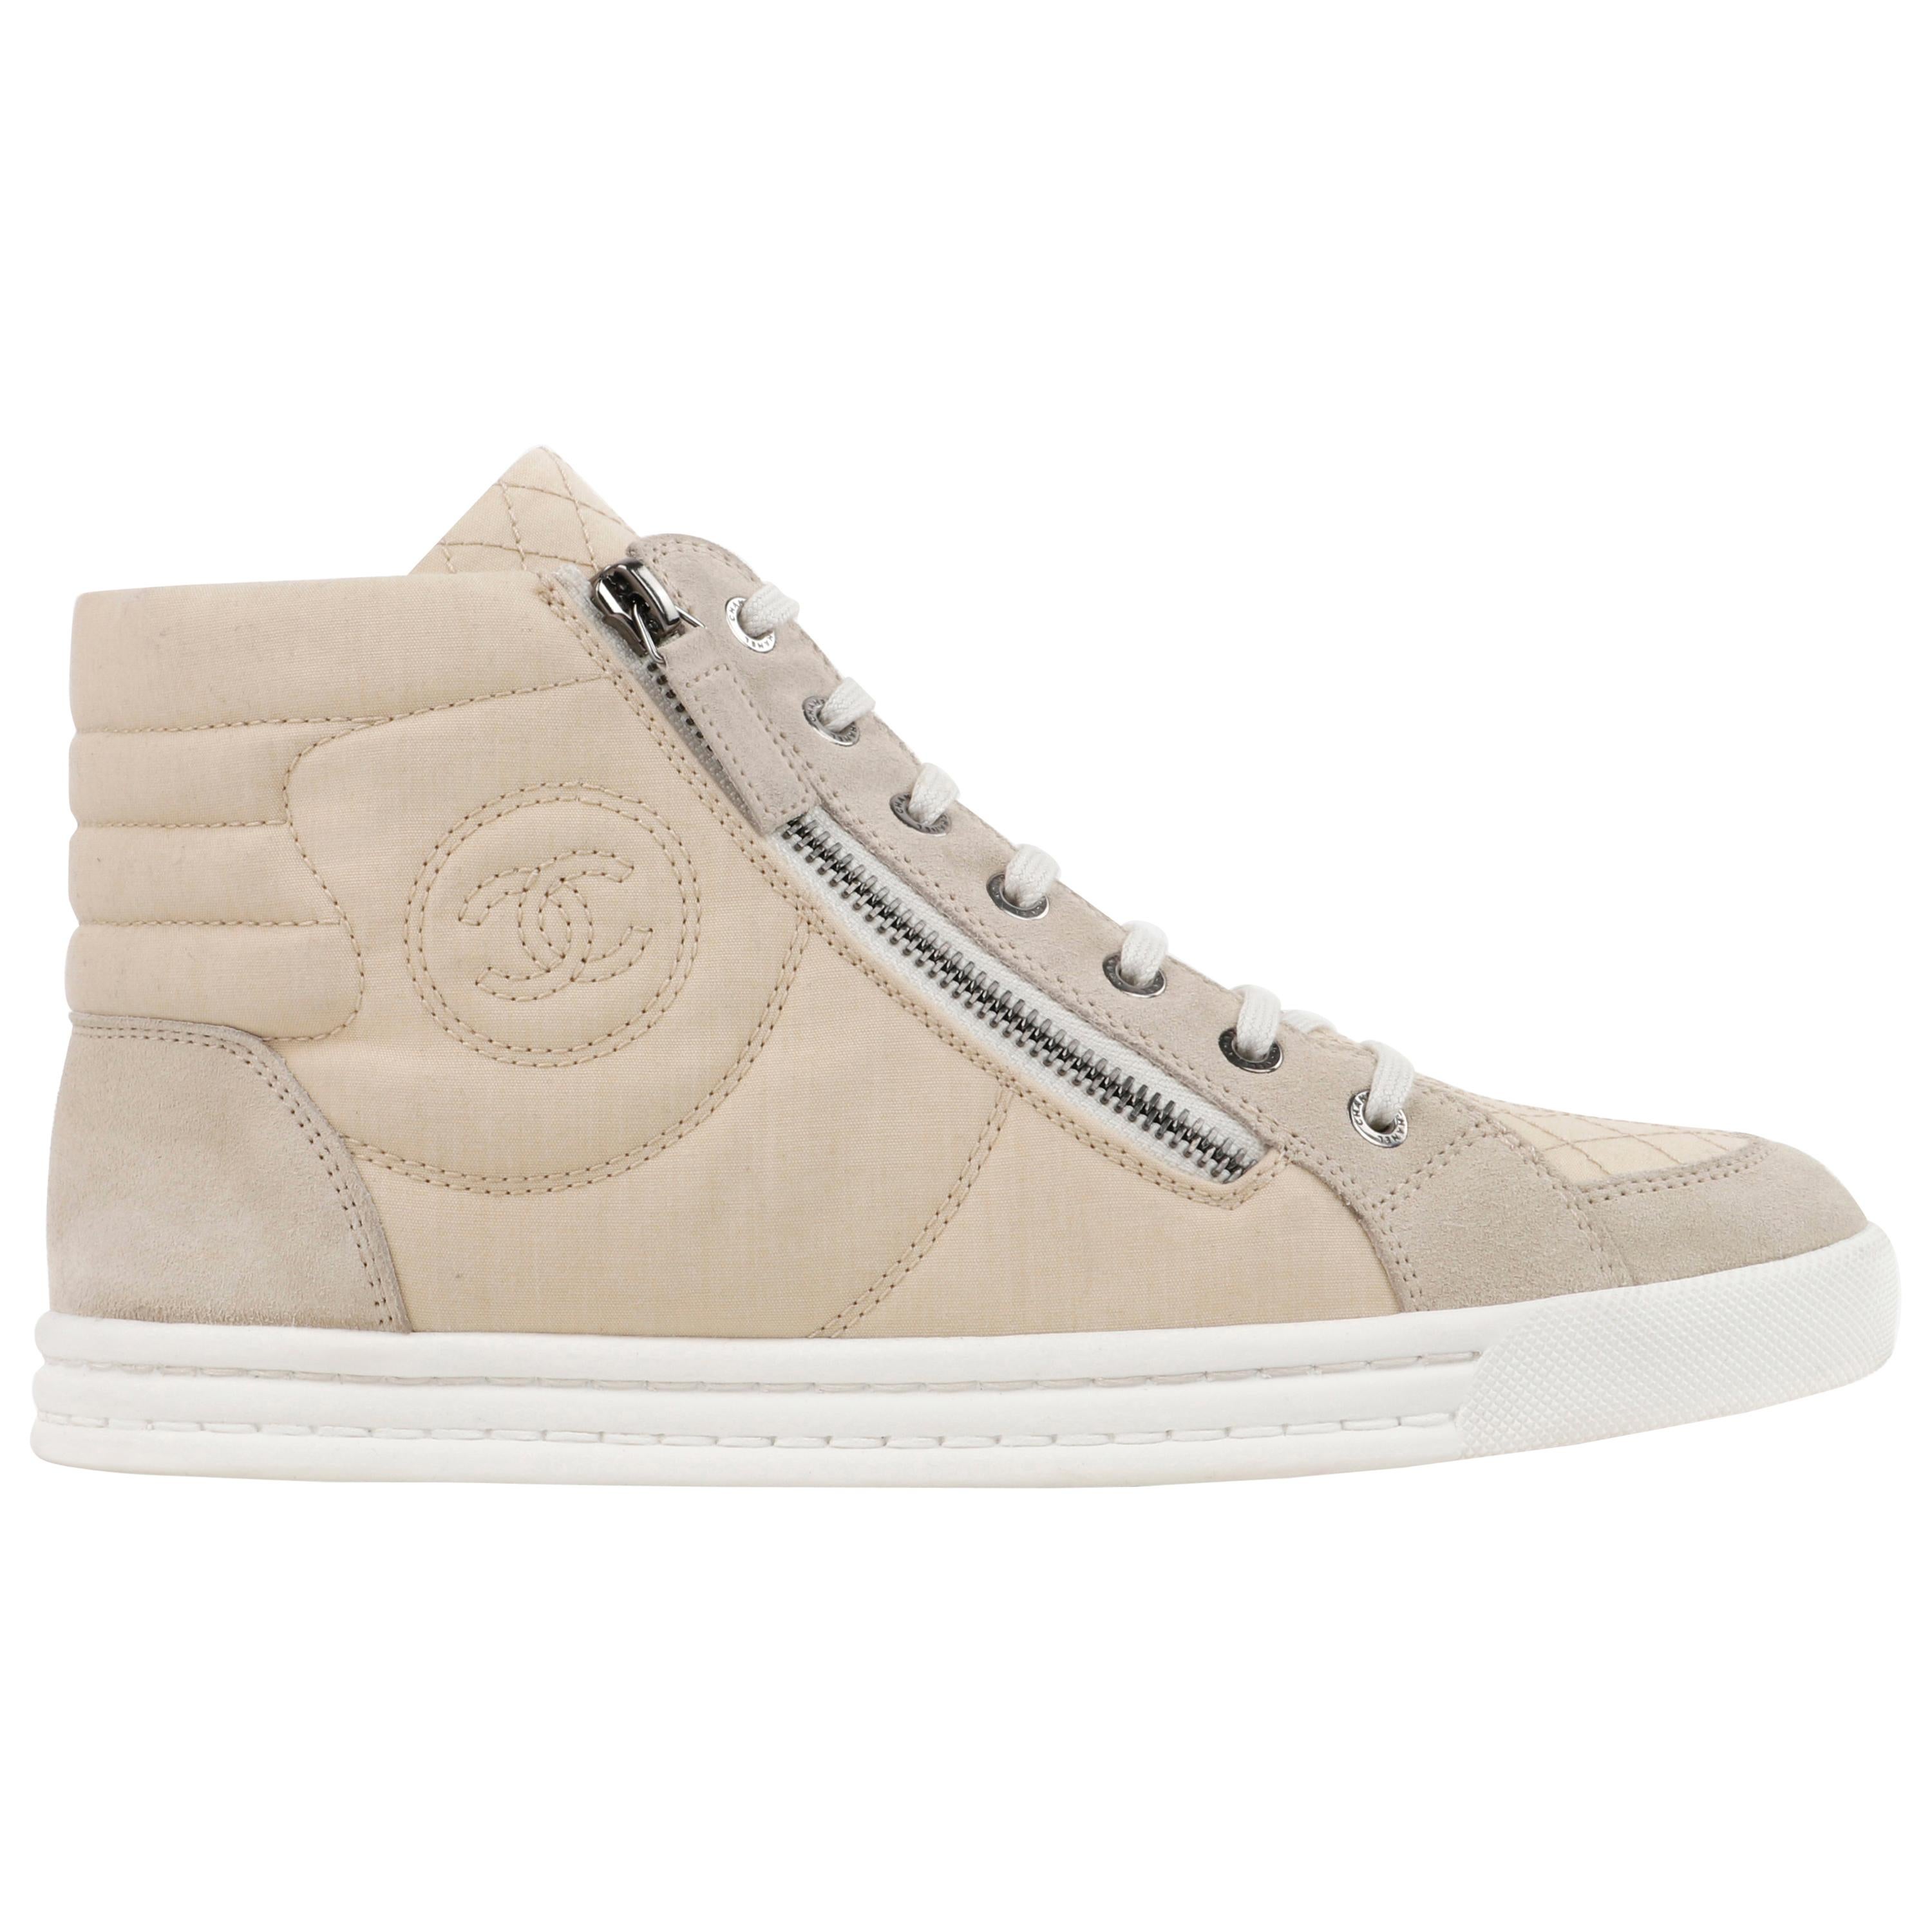 CHANEL Beige Quilted Canvas Lace Up High Top Sneakers